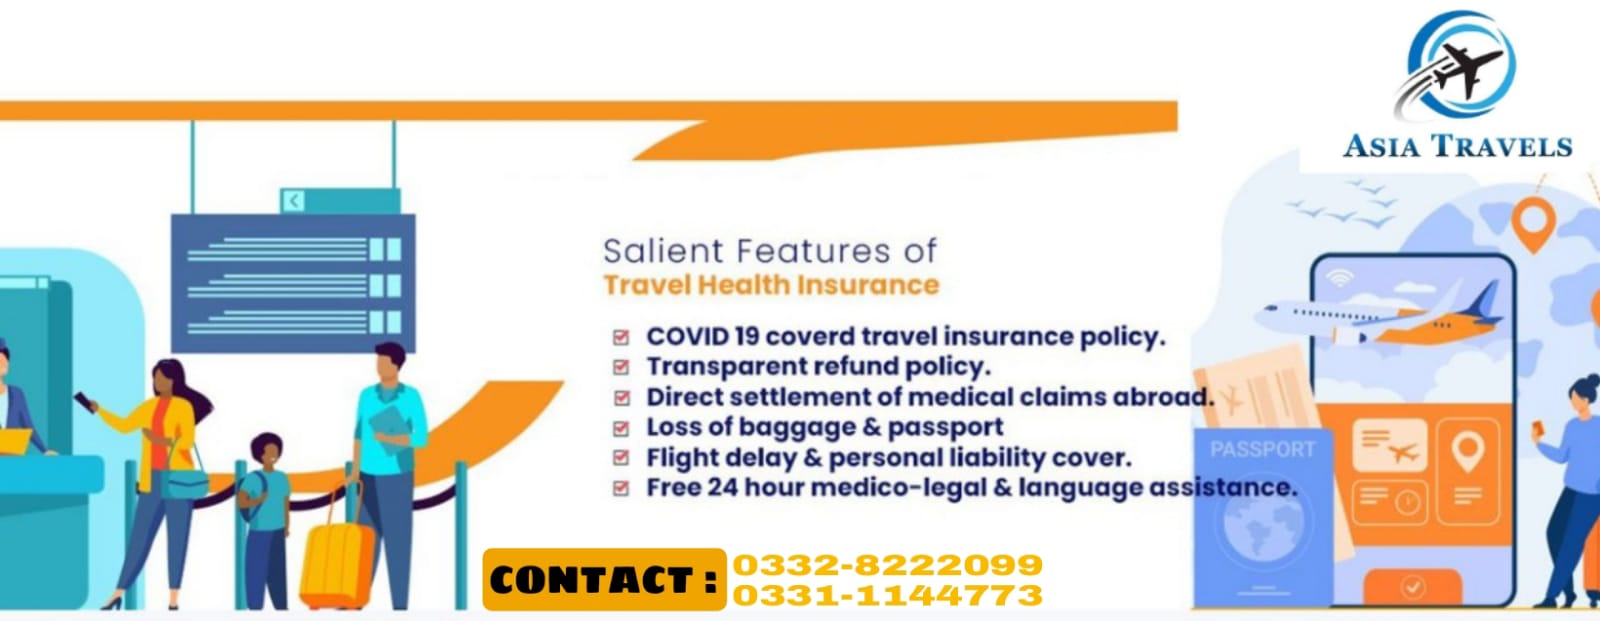 Travel & Health Insurance Services 